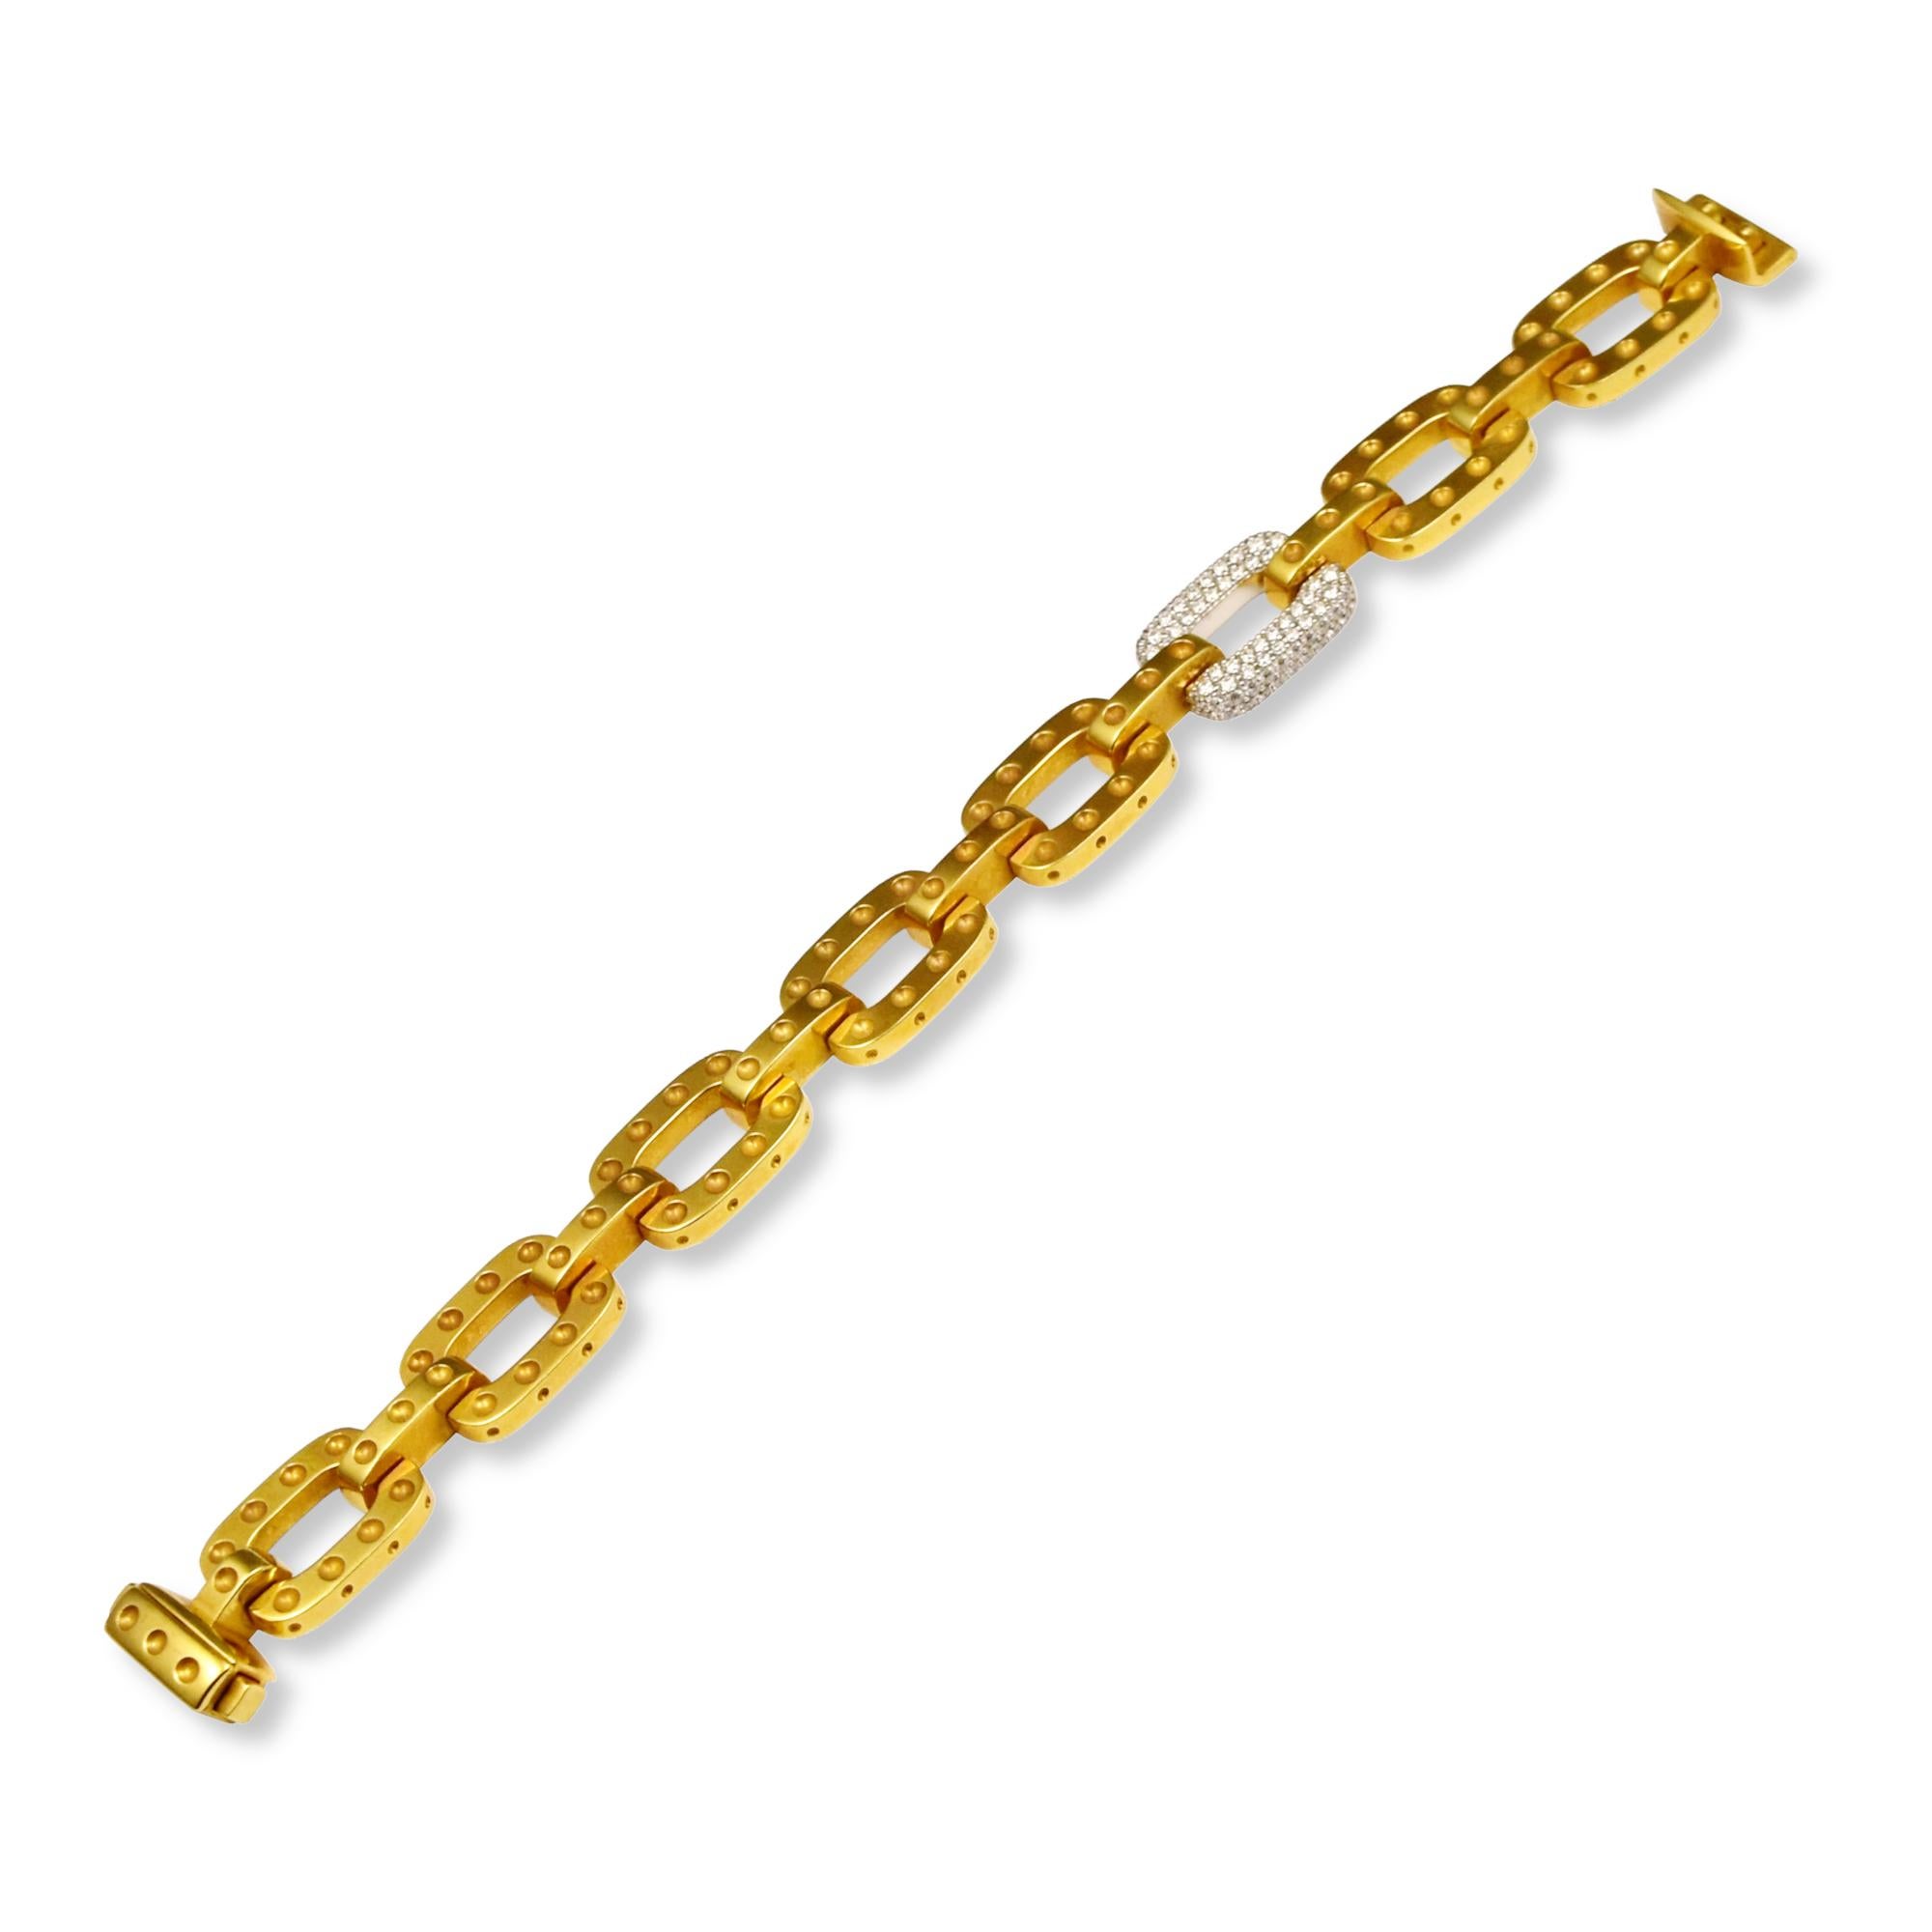 Designer: Roberto Coin

Model:Pois Moi

Material: Yellow Gold; White Gold

Metal Purity:  18k

Stone: Round Brilliant Cut Diamond

Clasp: Slide lock

Bracelet Length: 7.25 inches 

Total Carat Weight : 0.90 ct

Total Item Weight (grams): 36.8